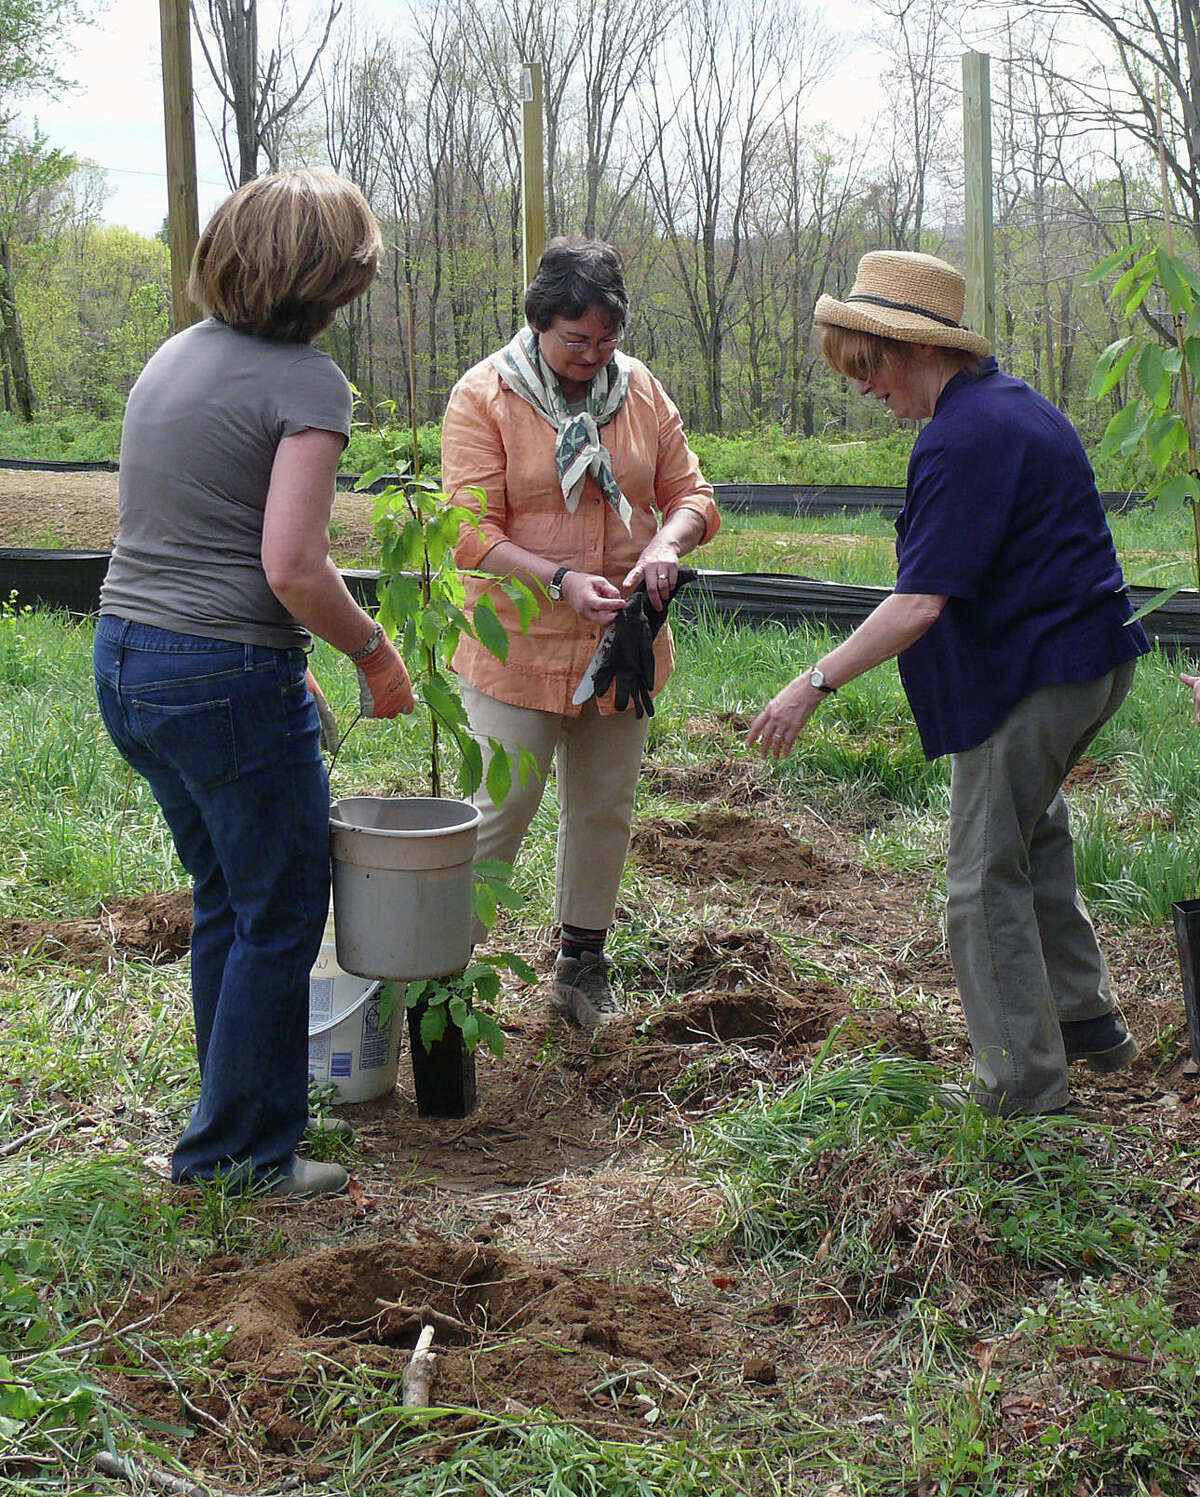 Members of the Fairfield Garden Club, from left, Moira Eick, president Peggy Moore, and Barbara Wooten, help plant American Chestnut trees Friday at the new softball field on Hoydens Lane to commemorate Arbor Day.